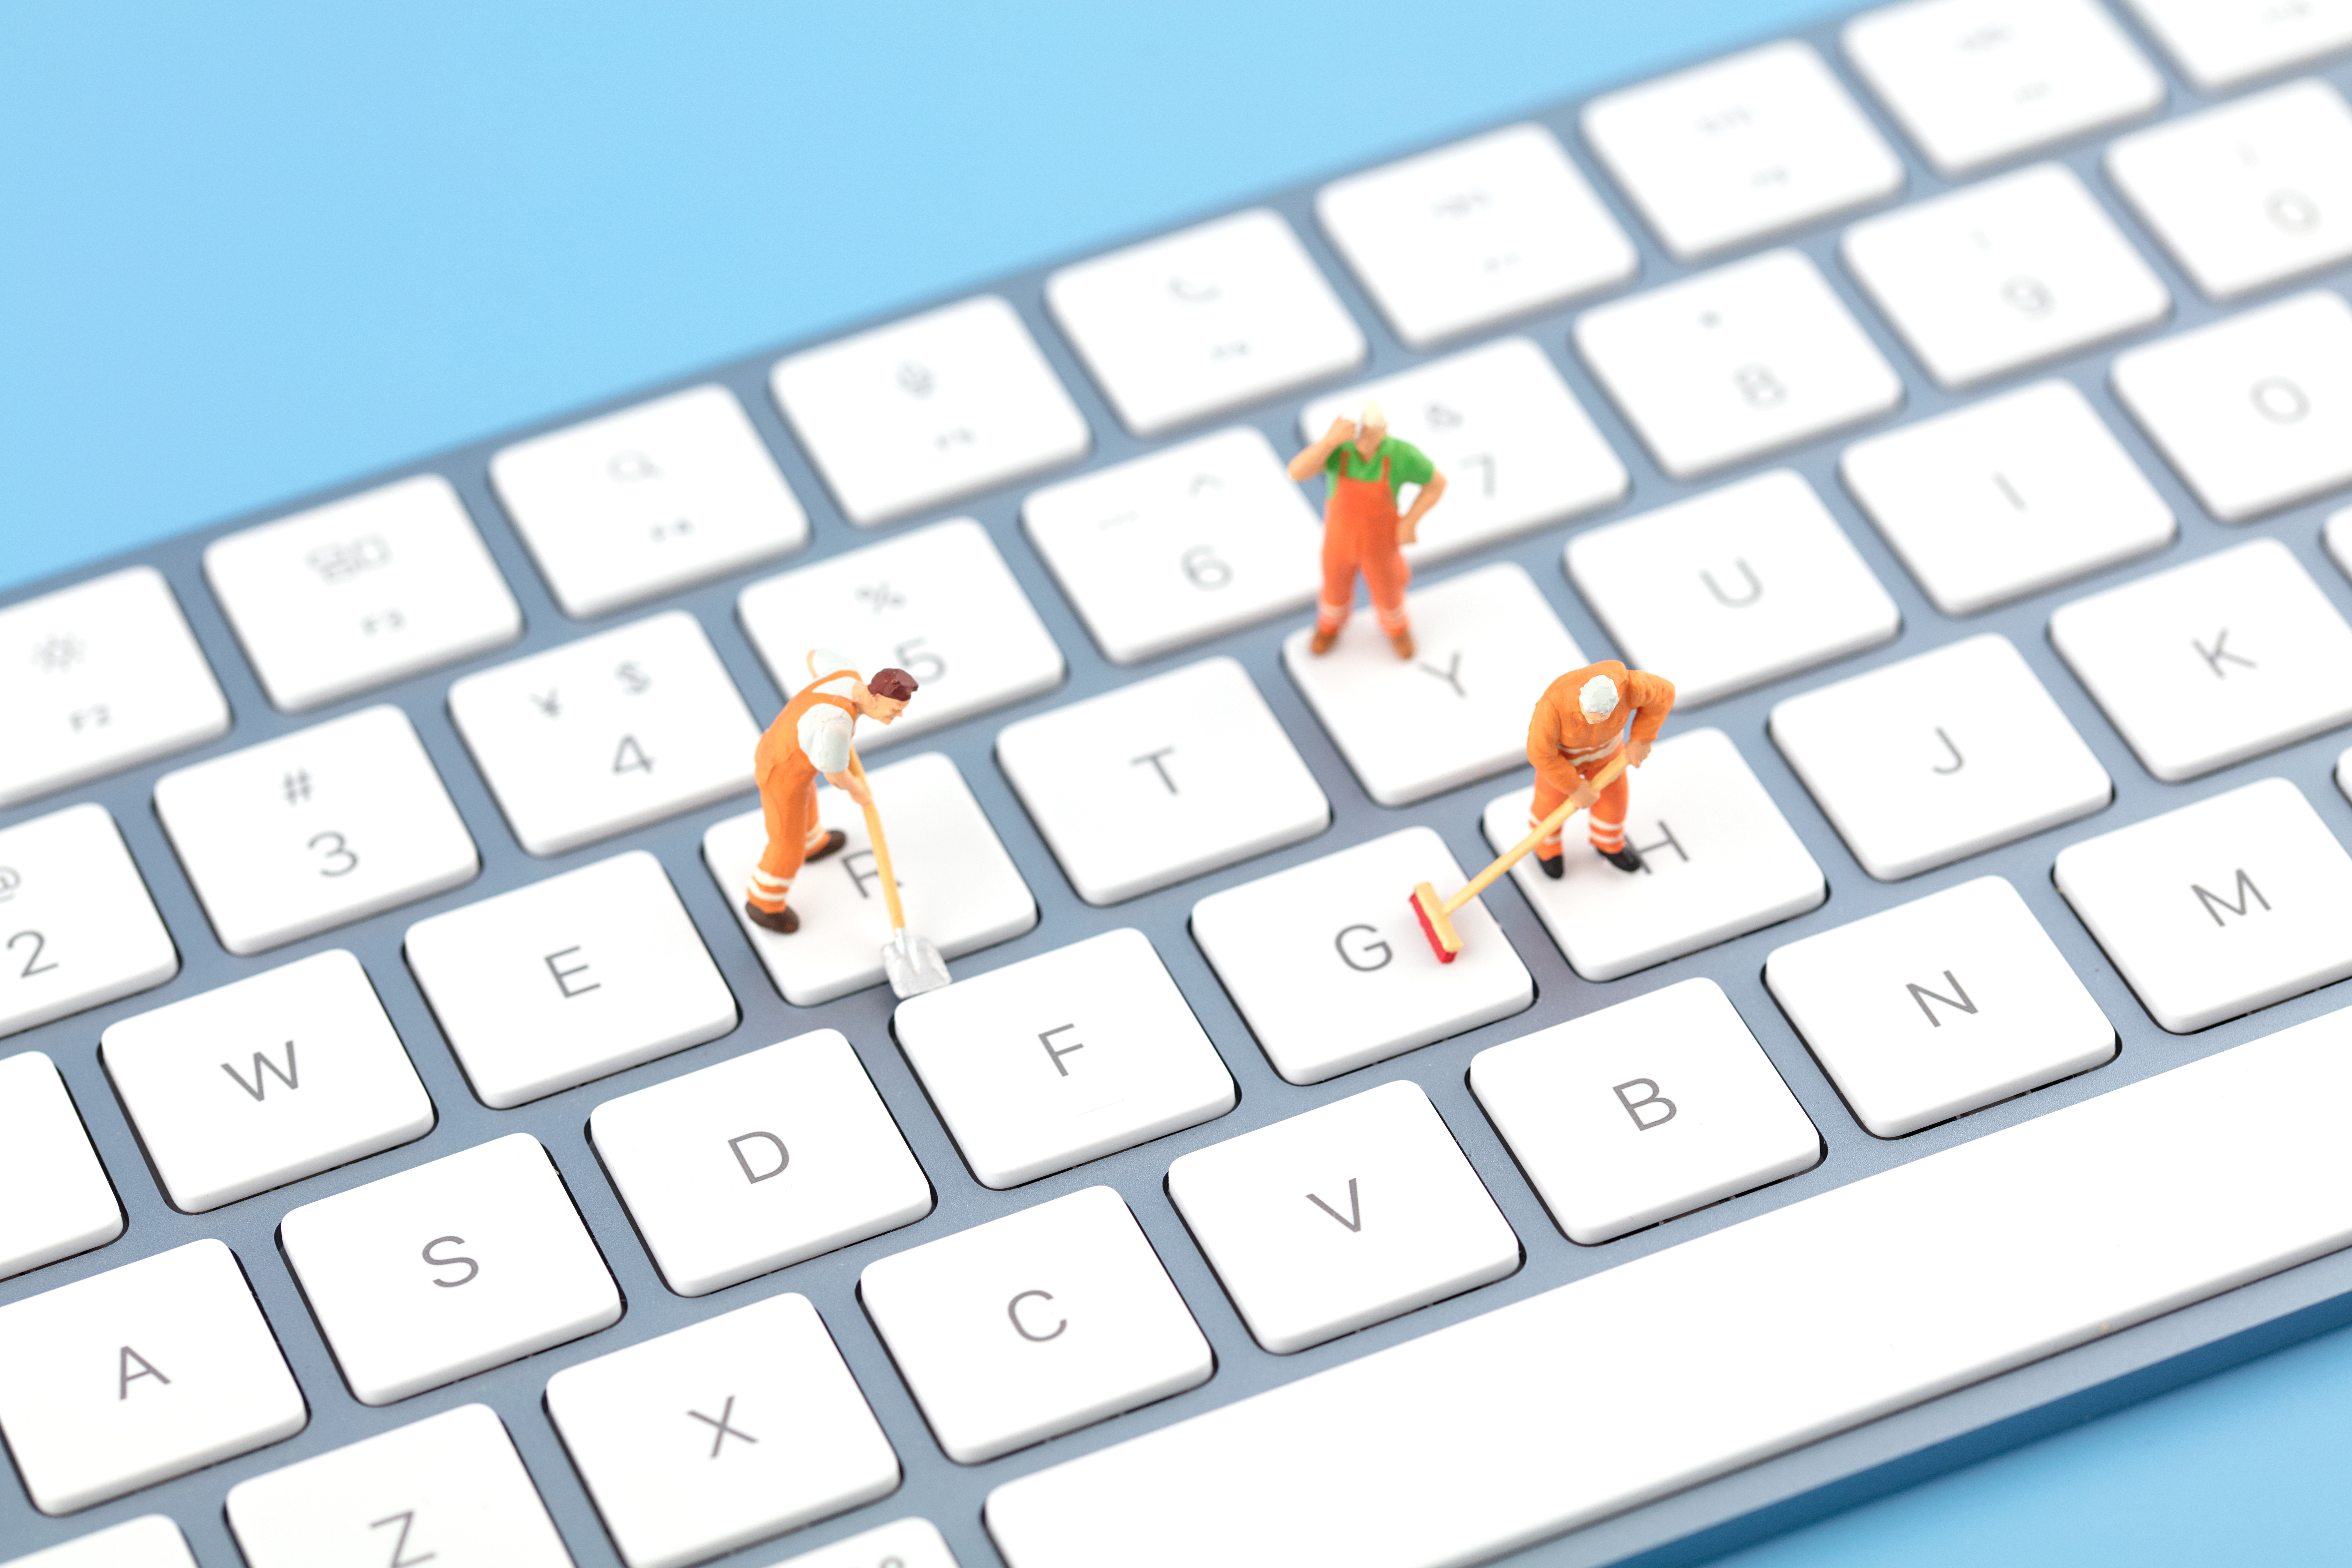 Miniature figures standing on a keyboard.